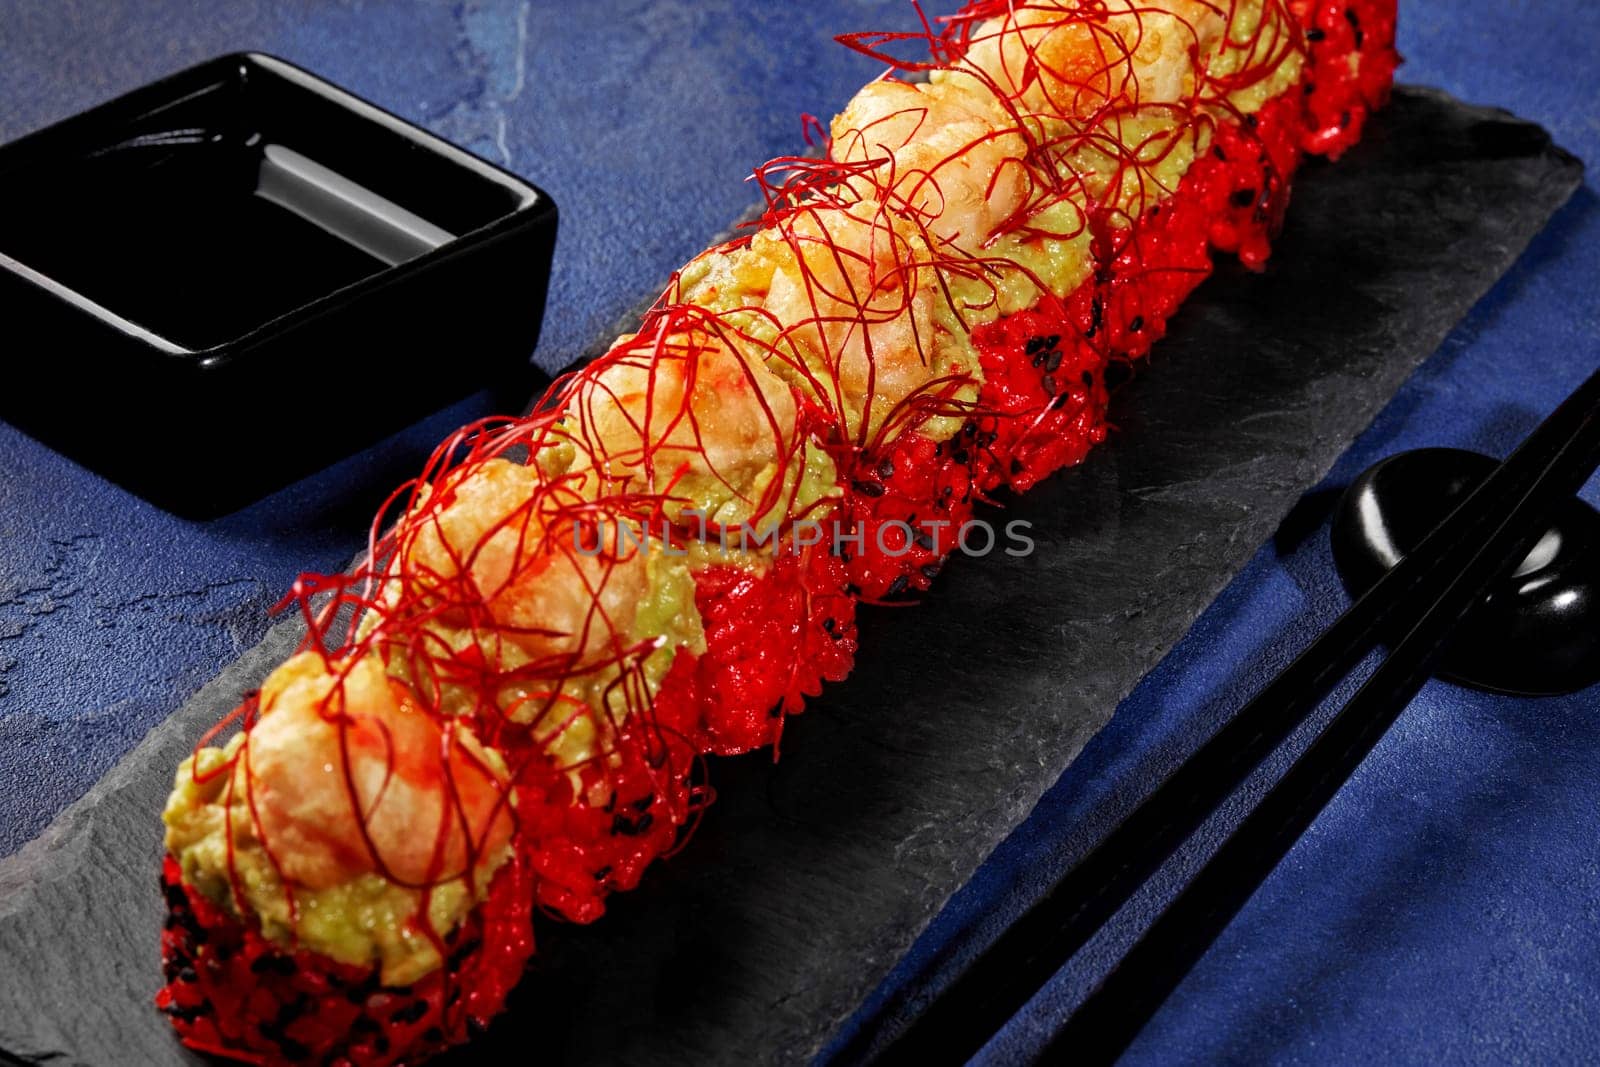 Red rice sushi rolls topped with avocado spread and shrimp tempura sprinkled with spicy chili pepper threads, presented on black slate board with soy sauce on blue background. Japanese cuisine